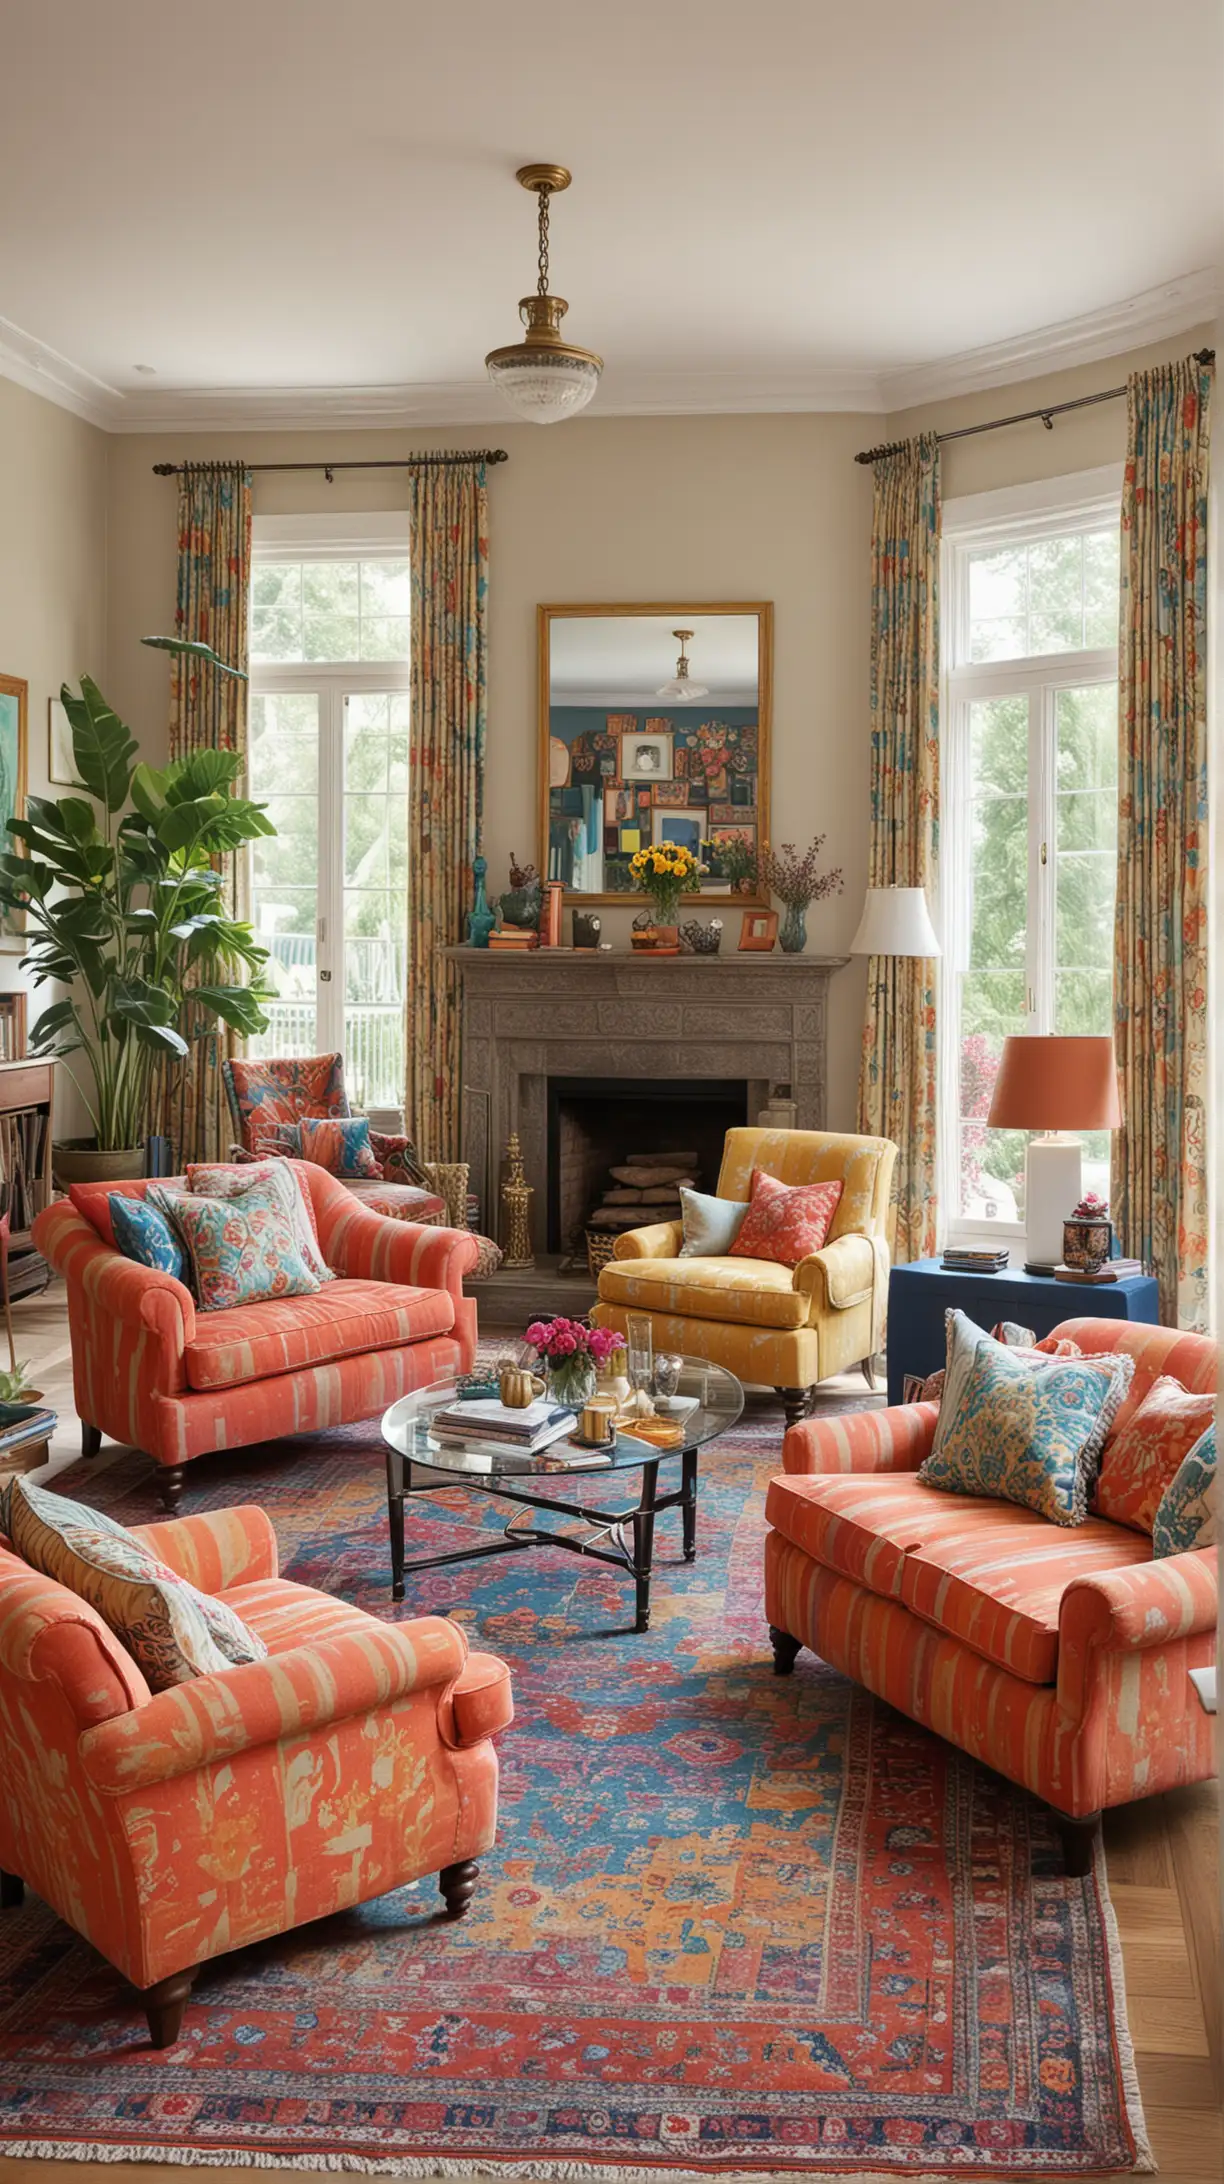 Eclectic Living Room Decor with Vibrant Sofas and Decorative Throws